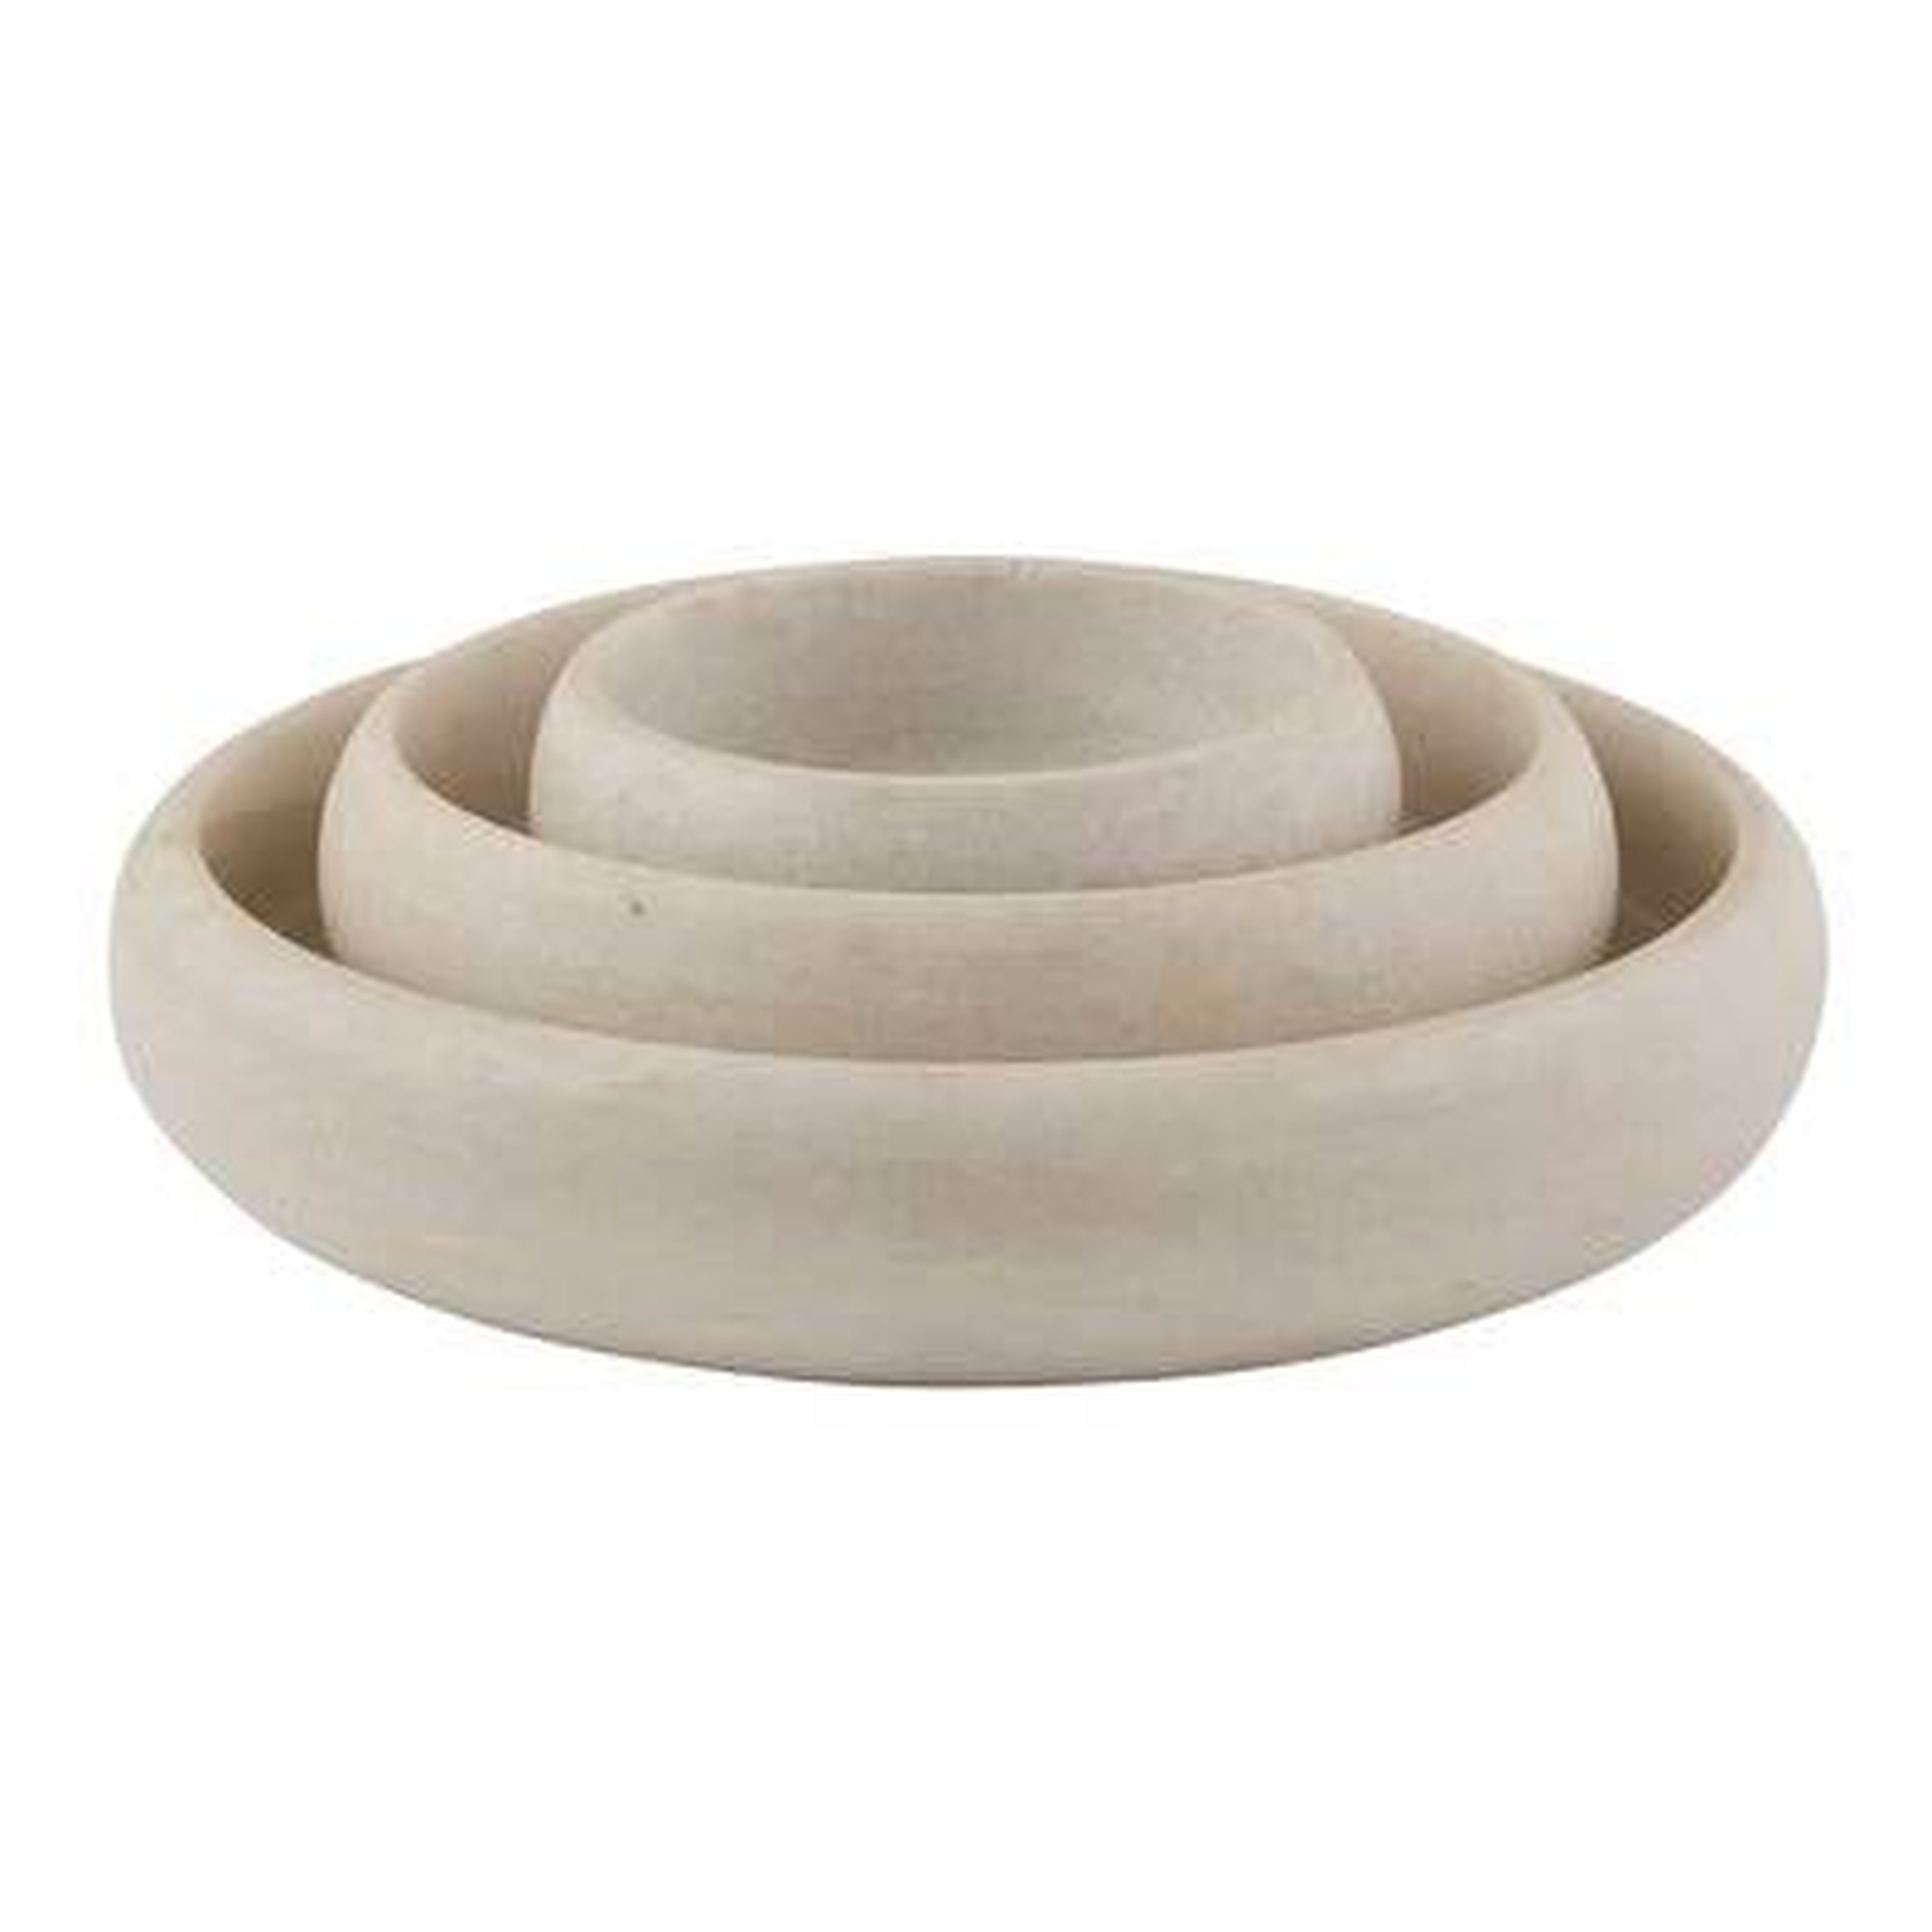 Bobo Intriguing Objects Marble Traditional Decorative Bowl in Beige - Perigold